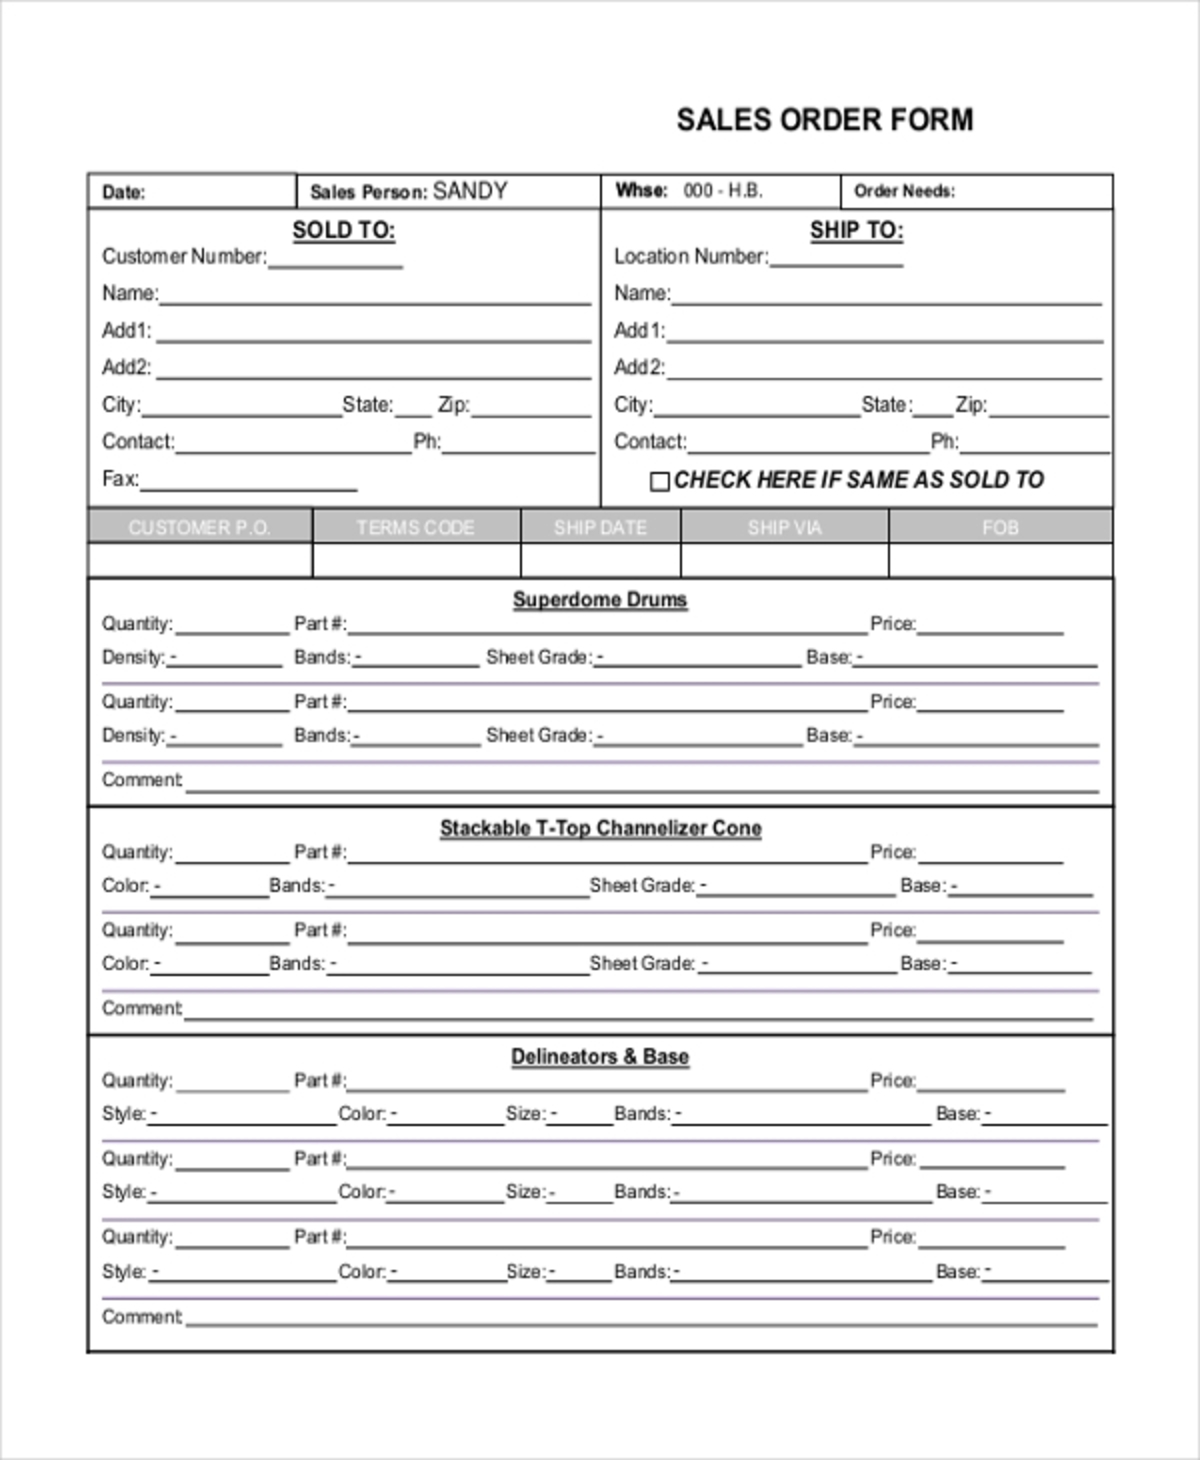 Sales Order form template